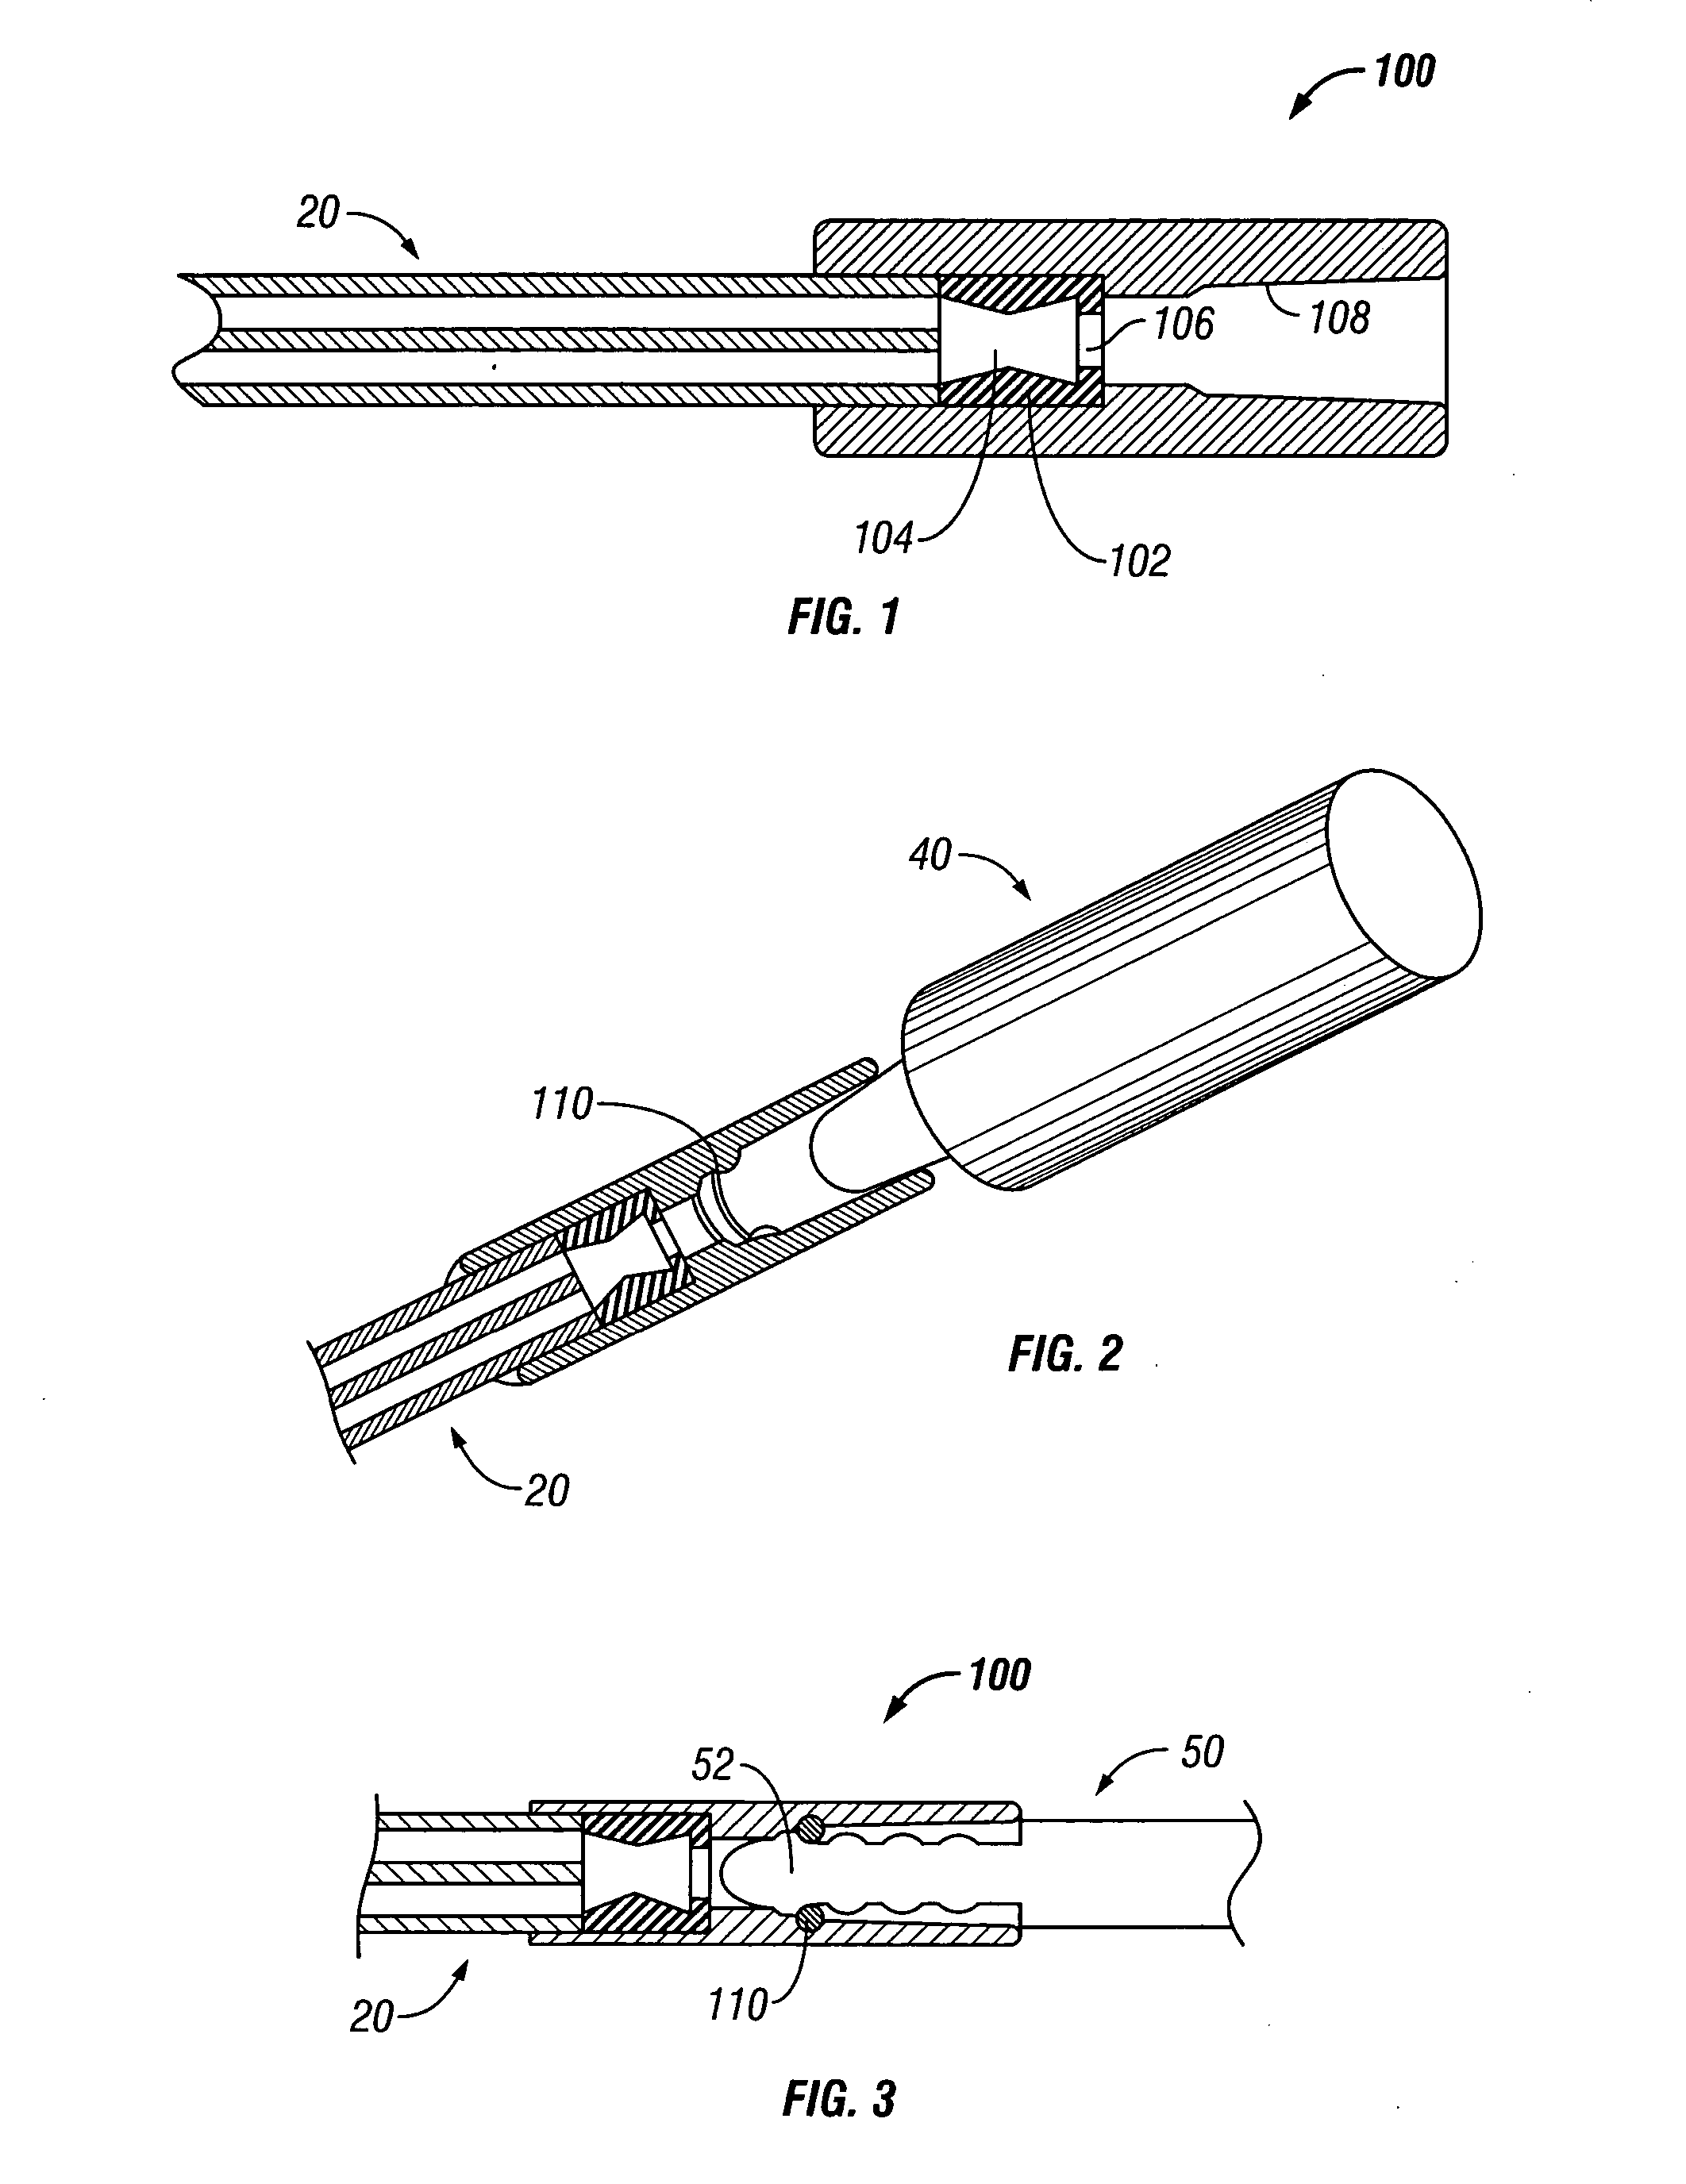 Multifunction adaptor for an open-ended catheter